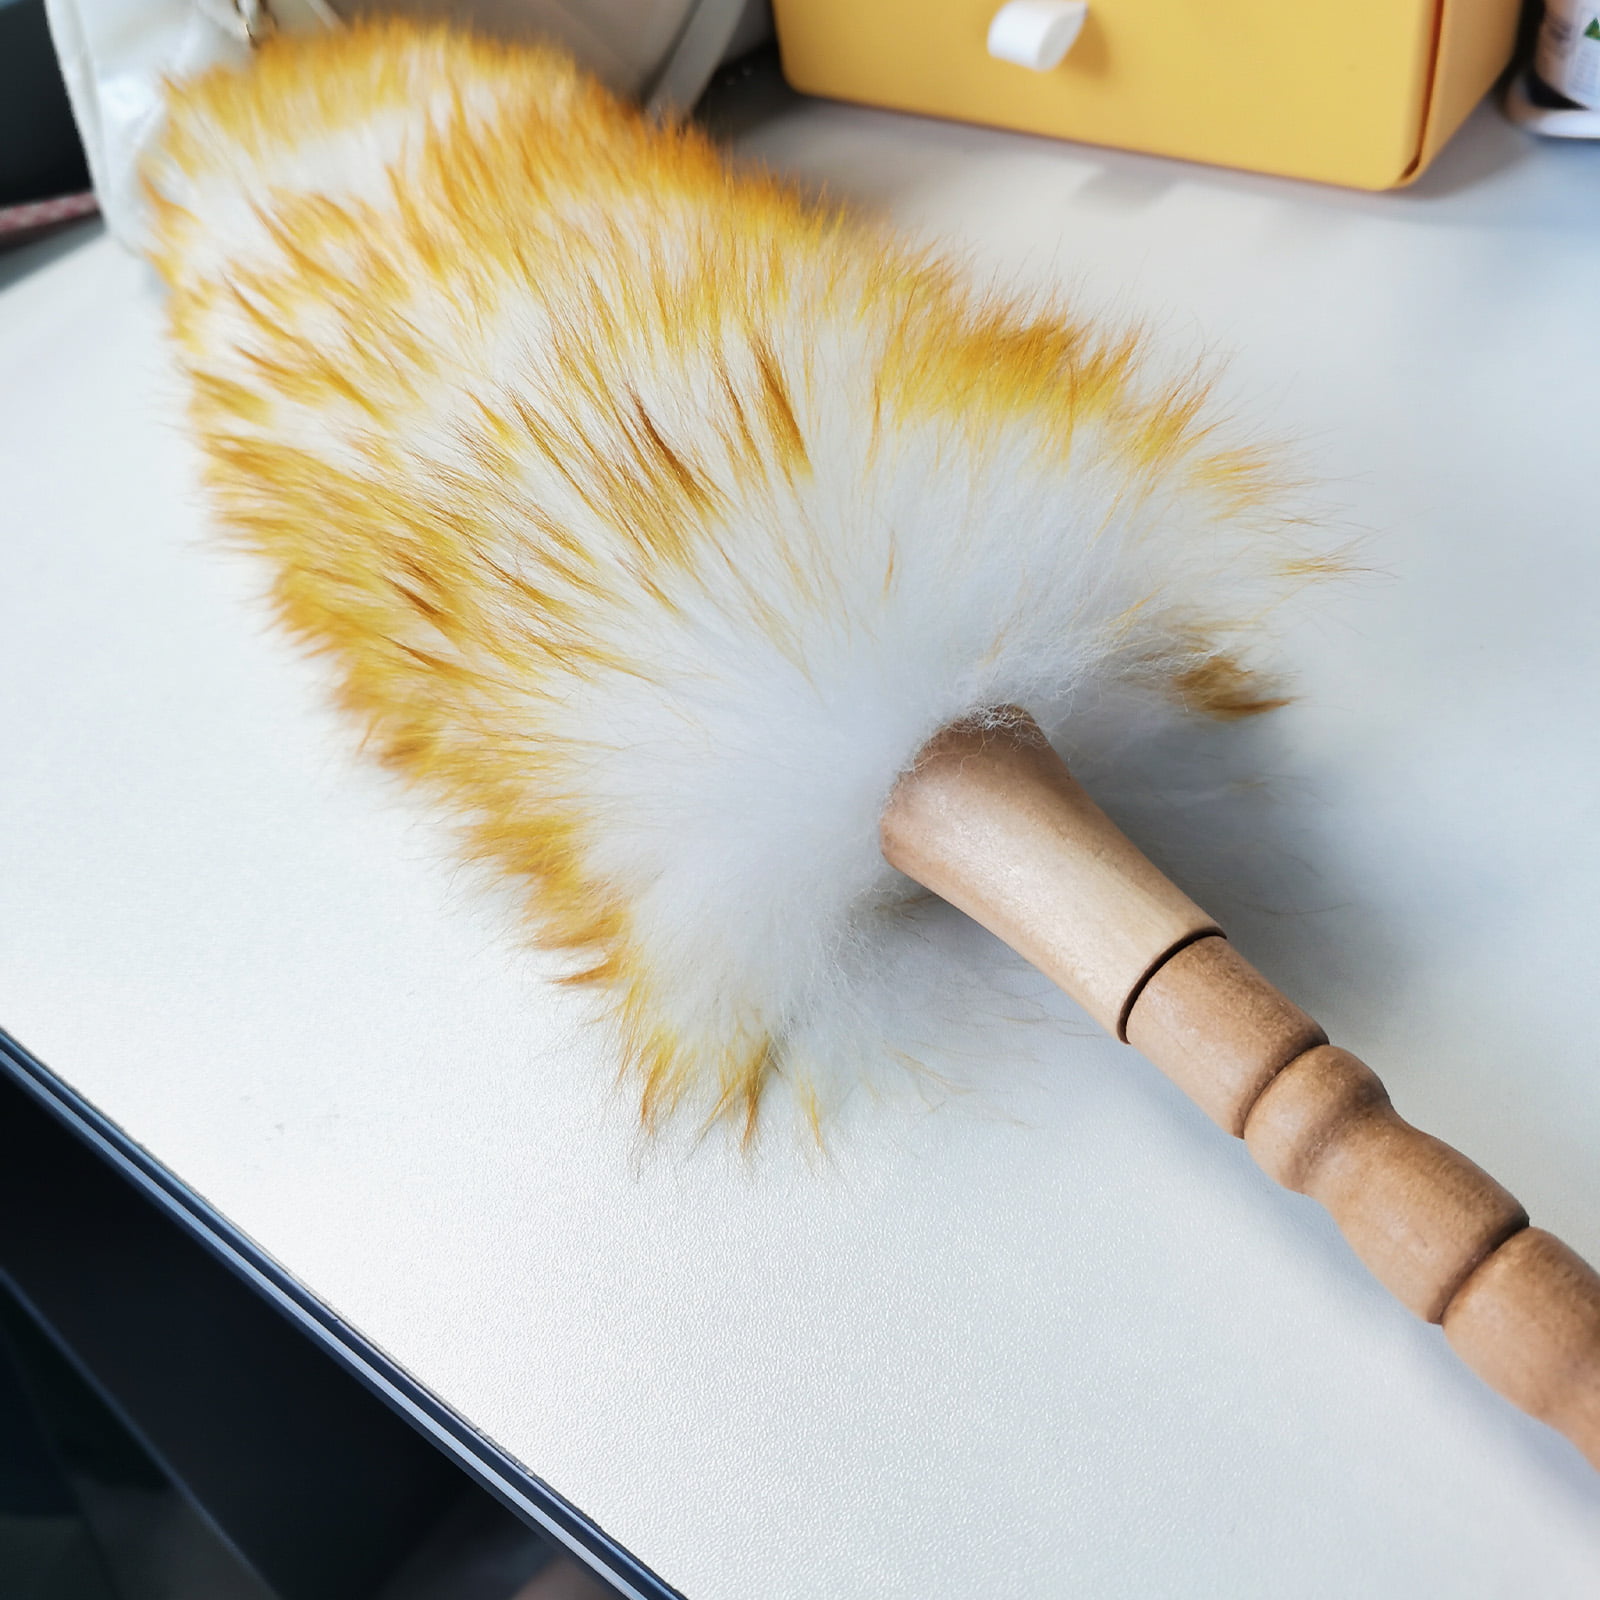 Anti-static Wool lambswool Feather Brush Duster Dust Cleaning Tool Wood Handle 